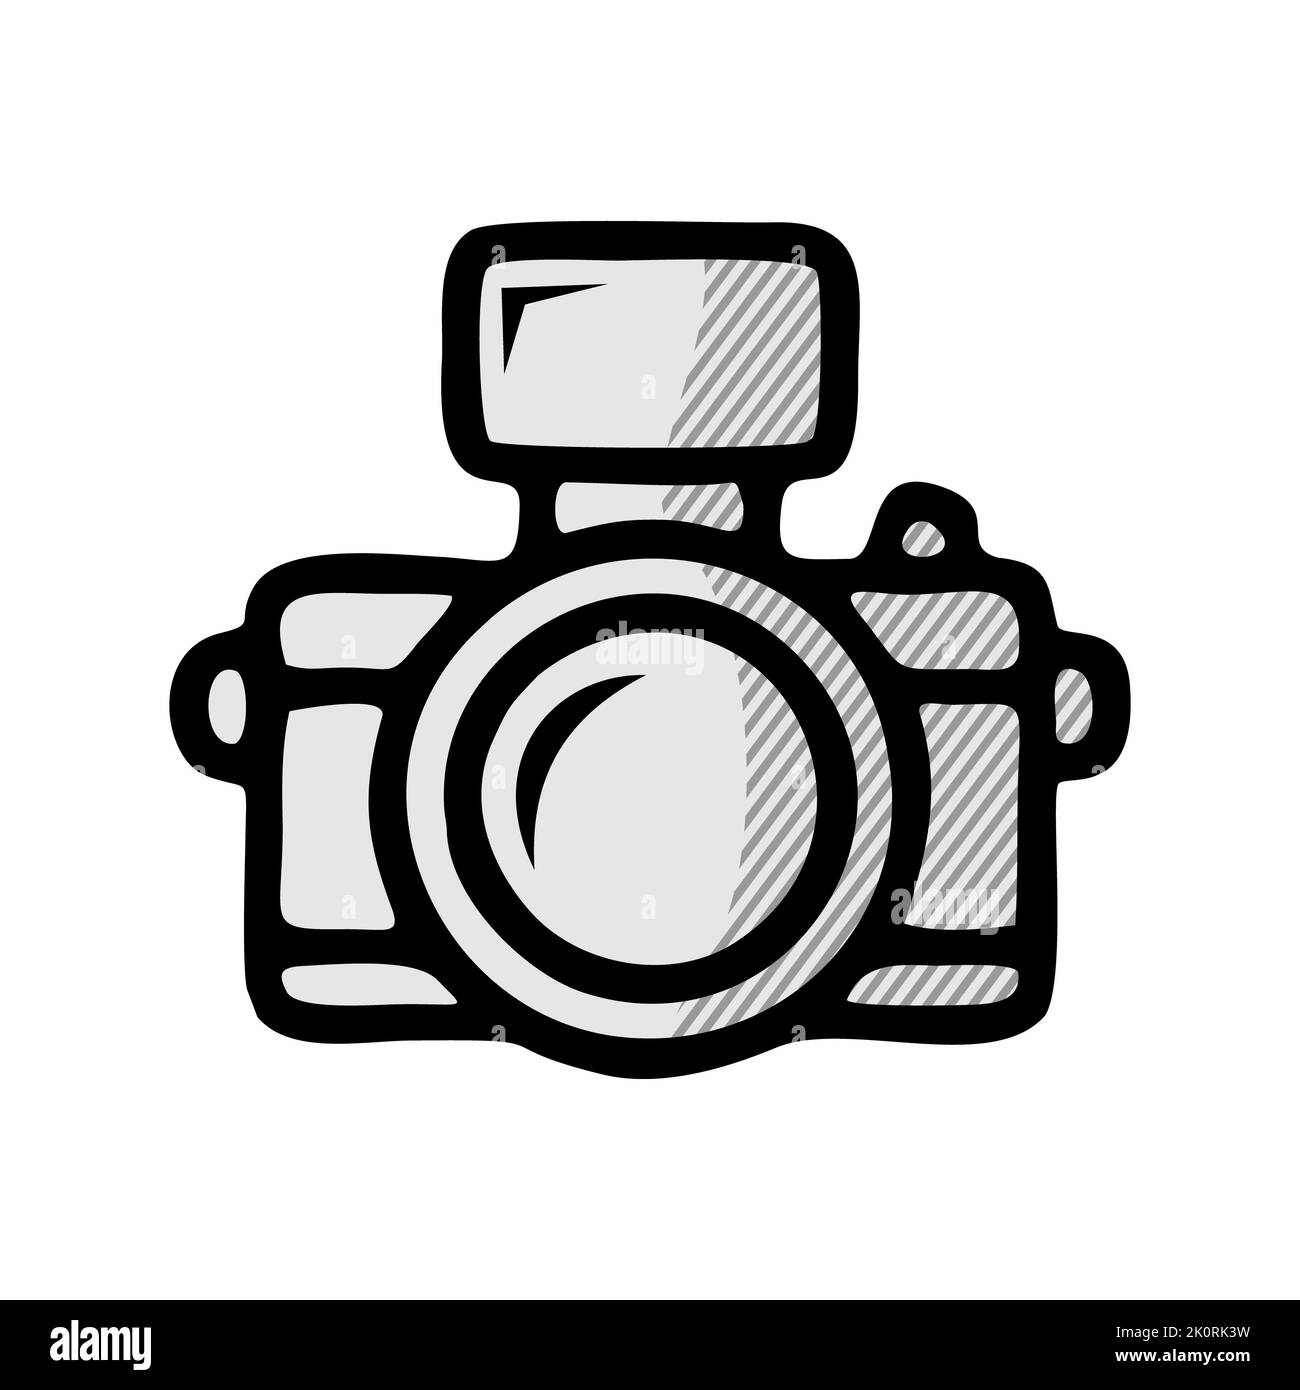 camera icon isolated on white background from event collection. camera icon trendy and modern camera symbol for logo, web, app, UI. camera icon simple Stock Photo